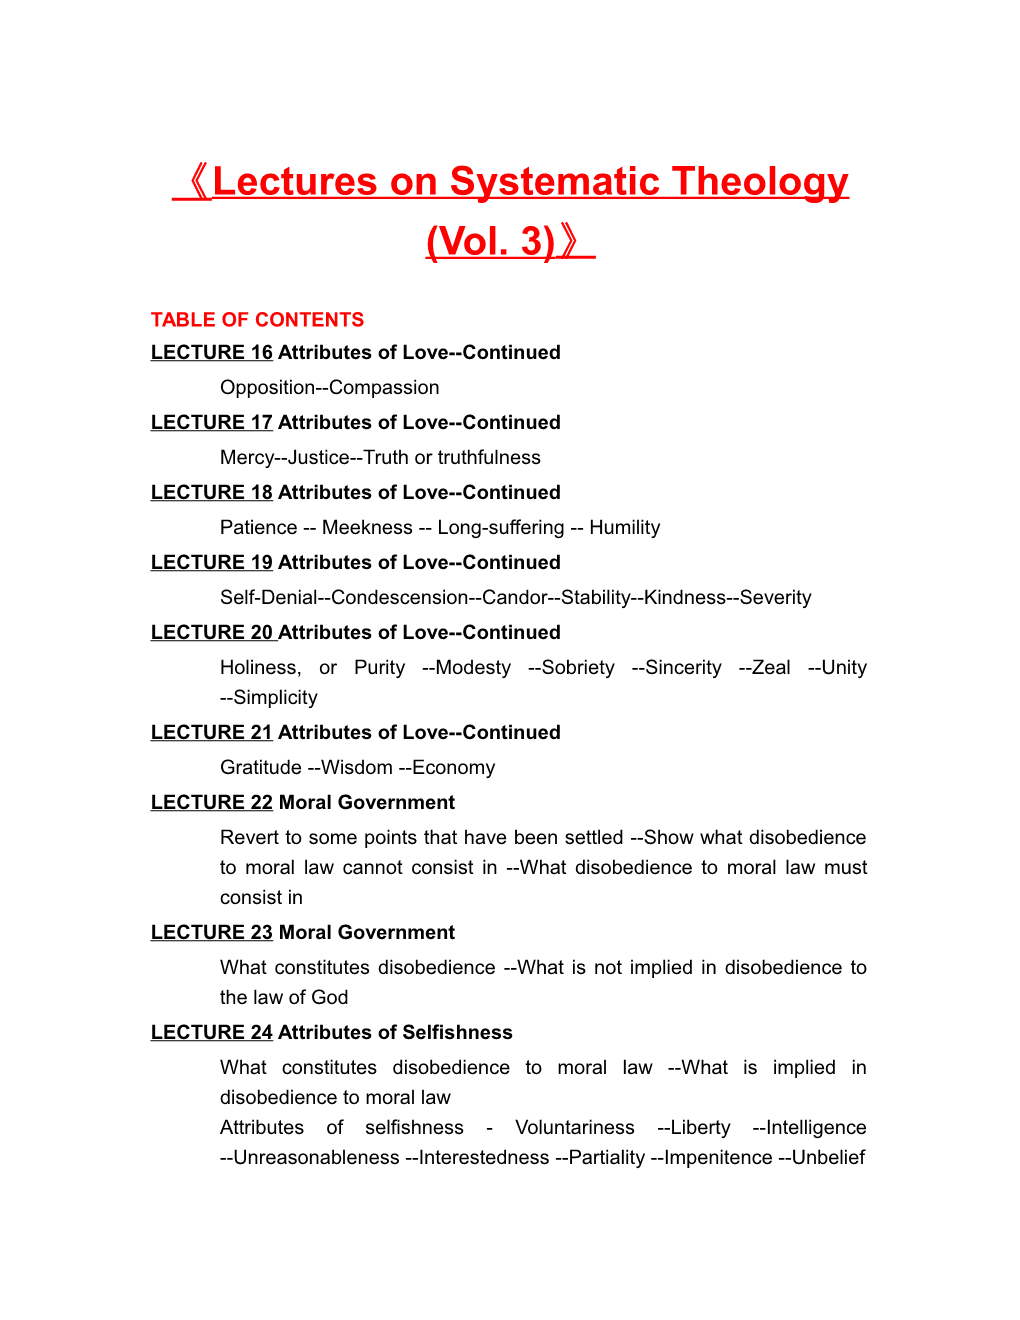 Lectures on Systematic Theology (Vol. 3)